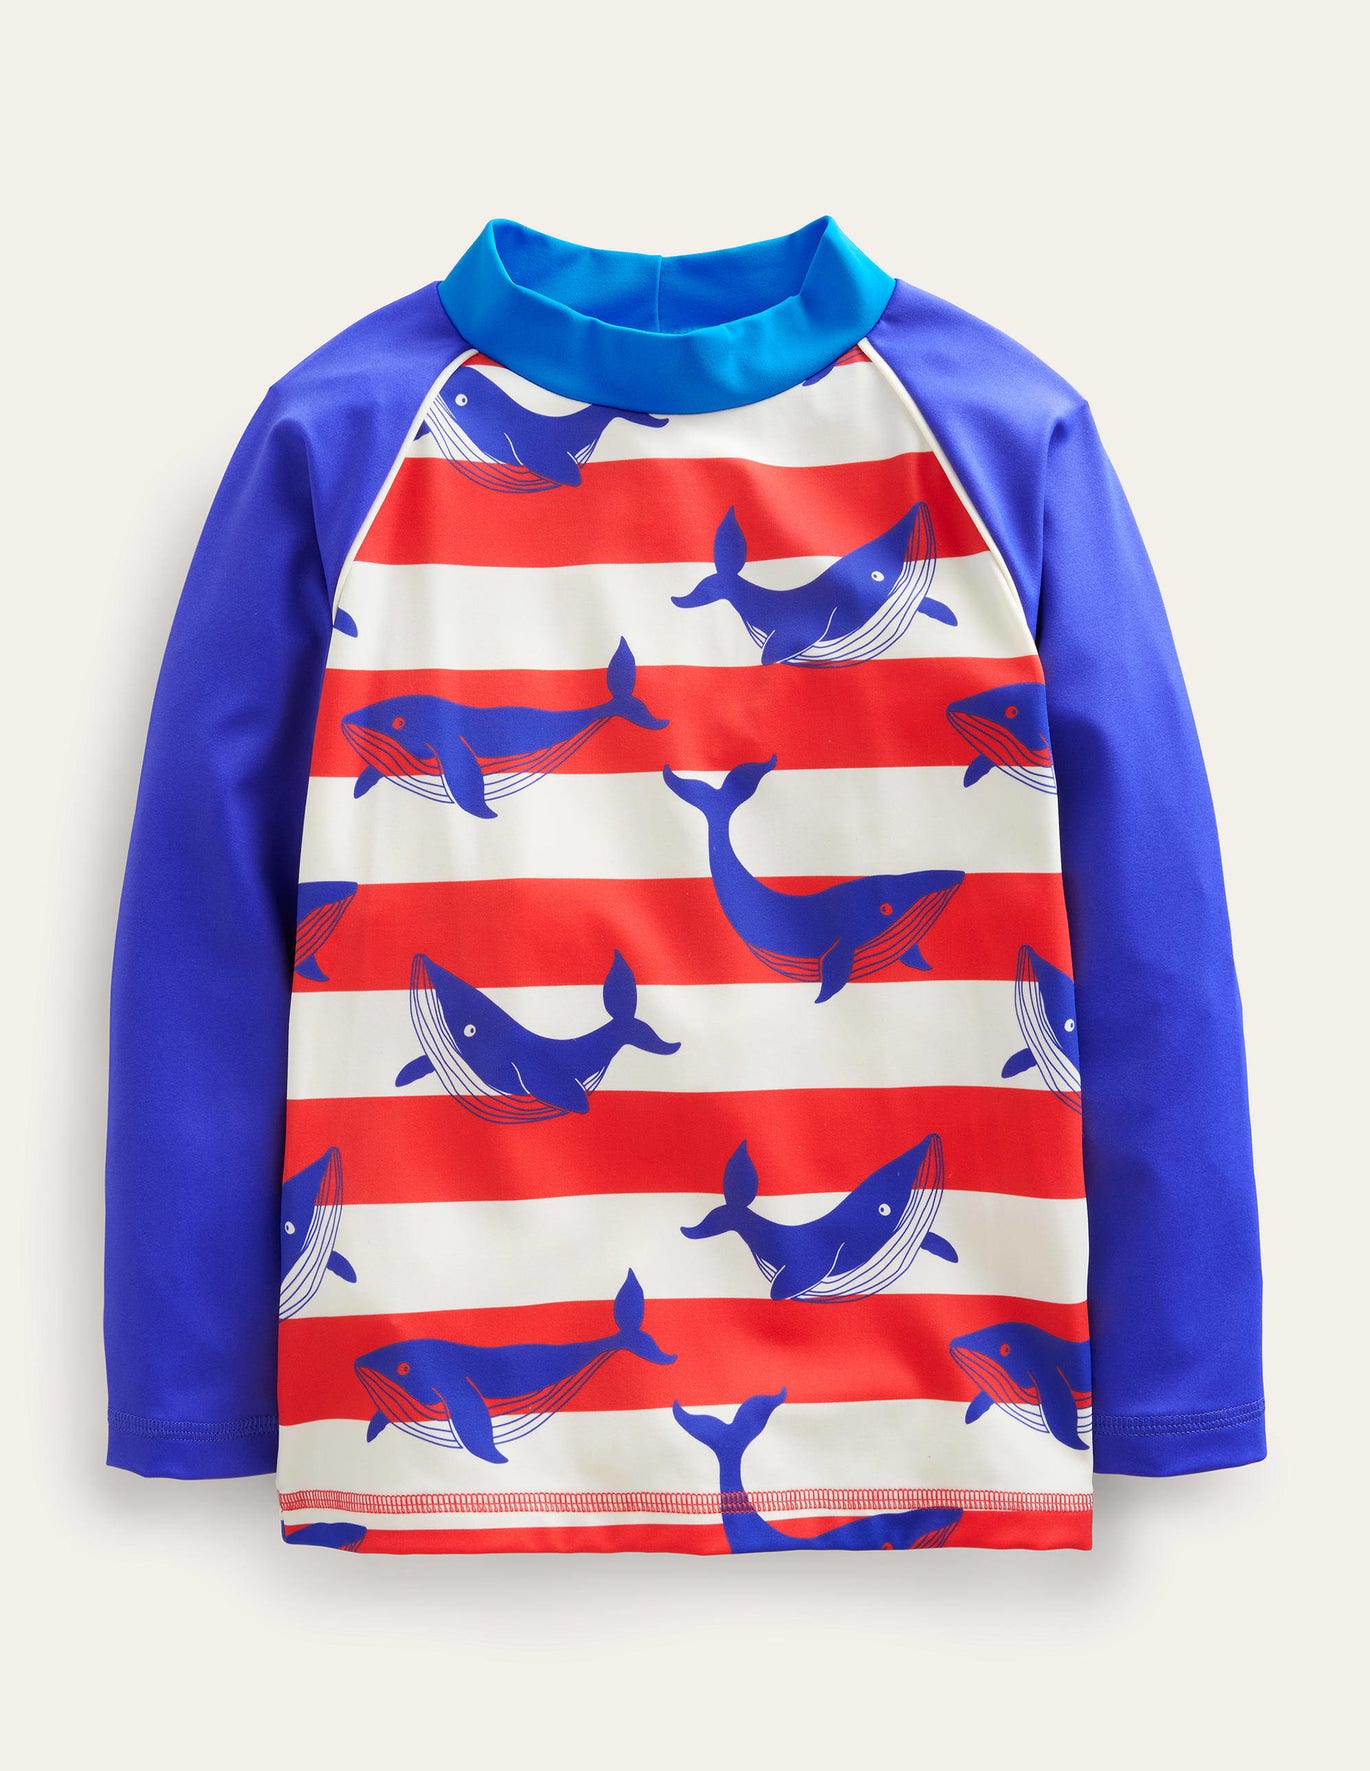 Boden Printed Rash Guard - Ivory and Strawberry Whales